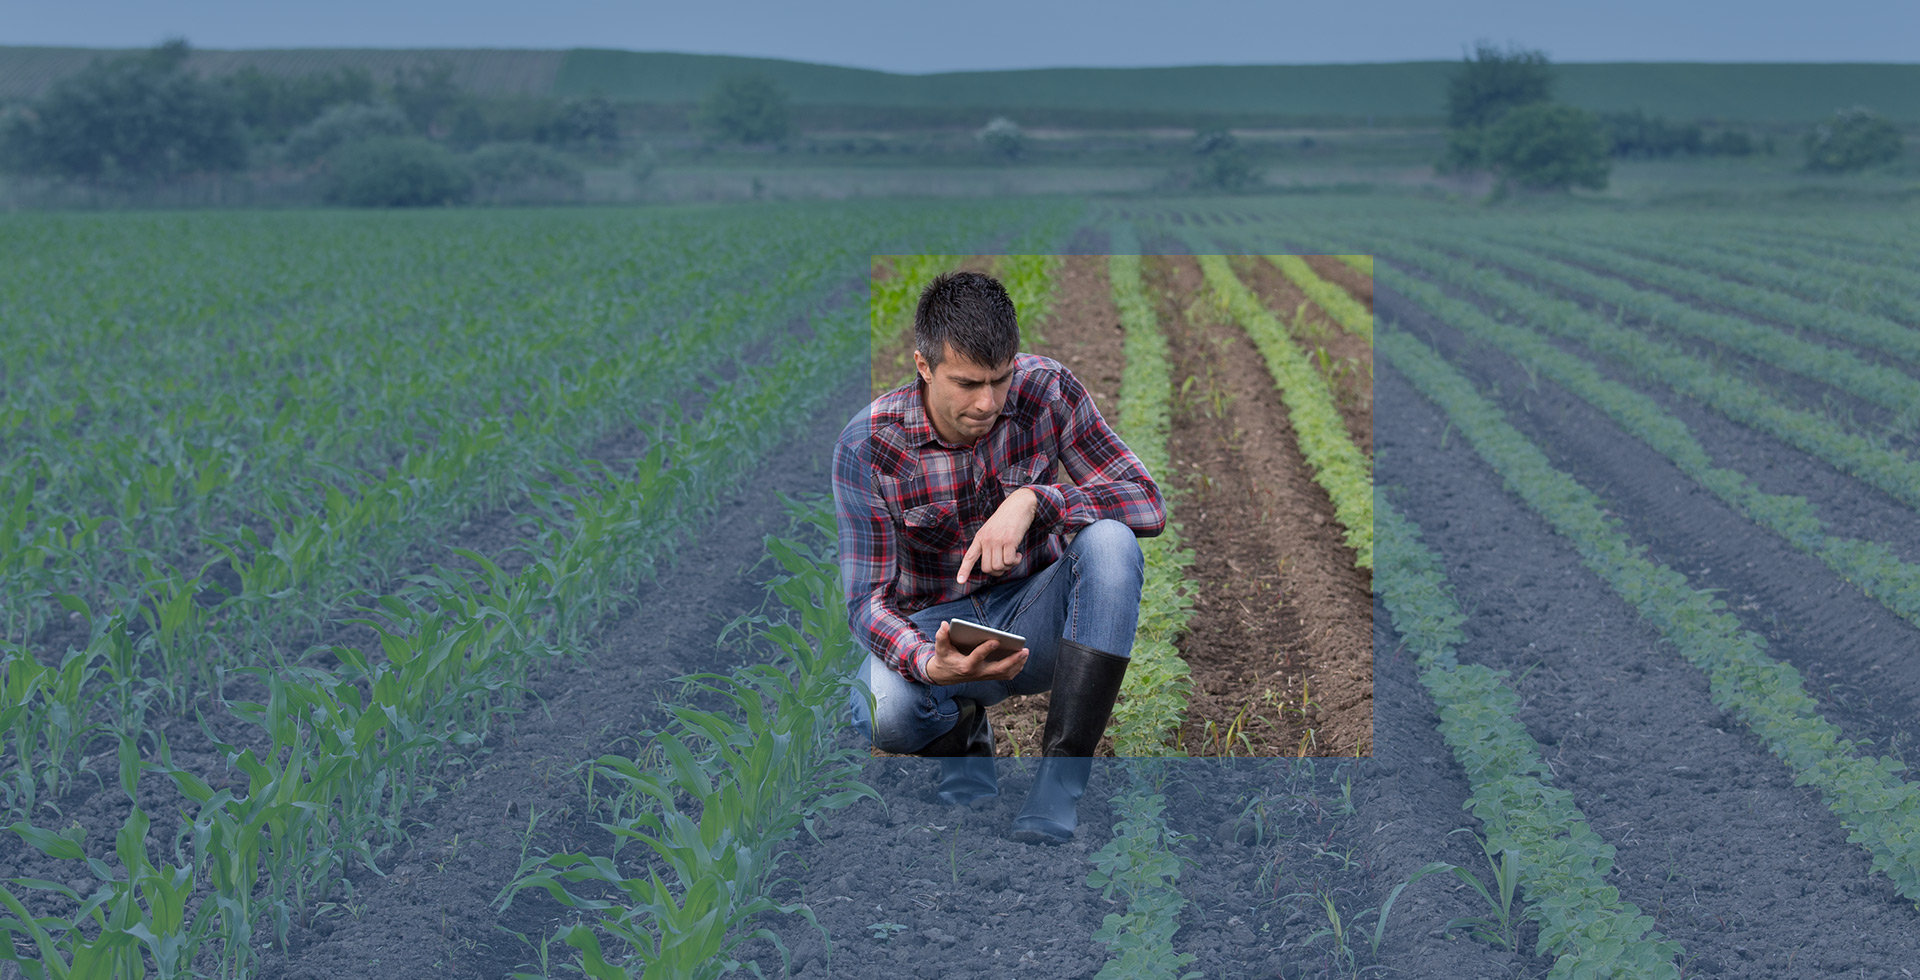 Farmer looking at seedlings with tablet in hand